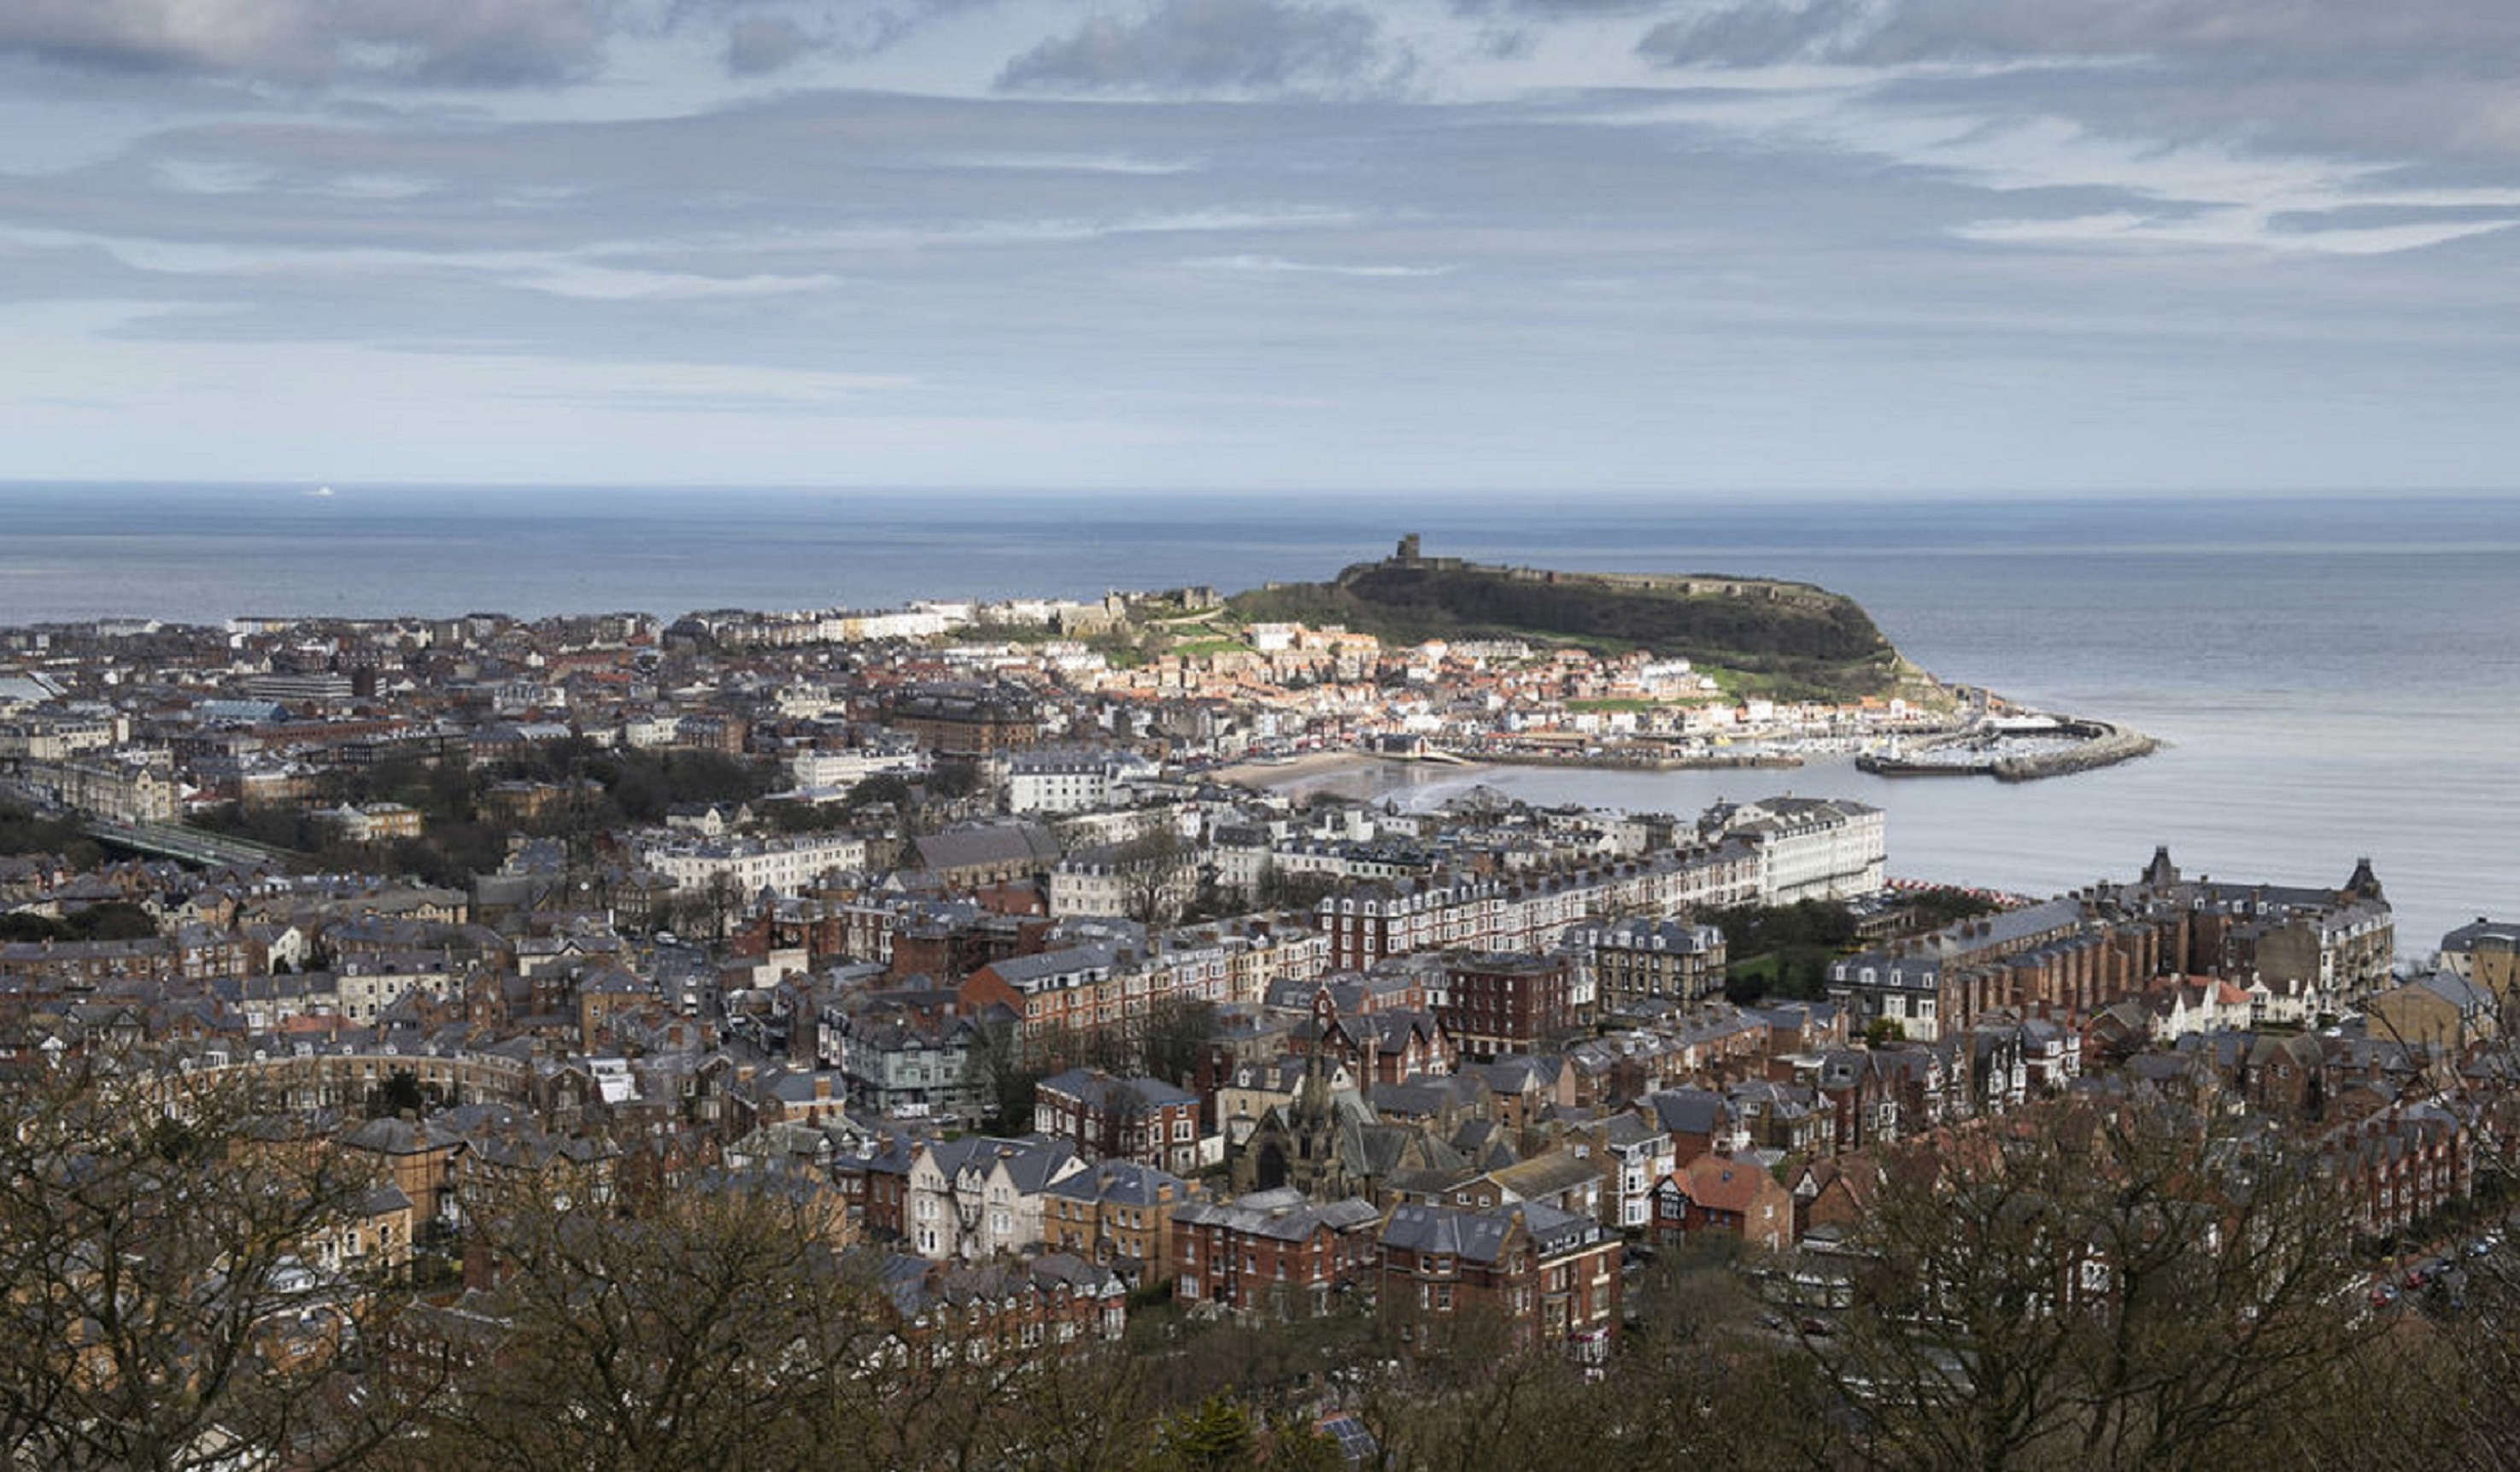 A general view of Scarborough